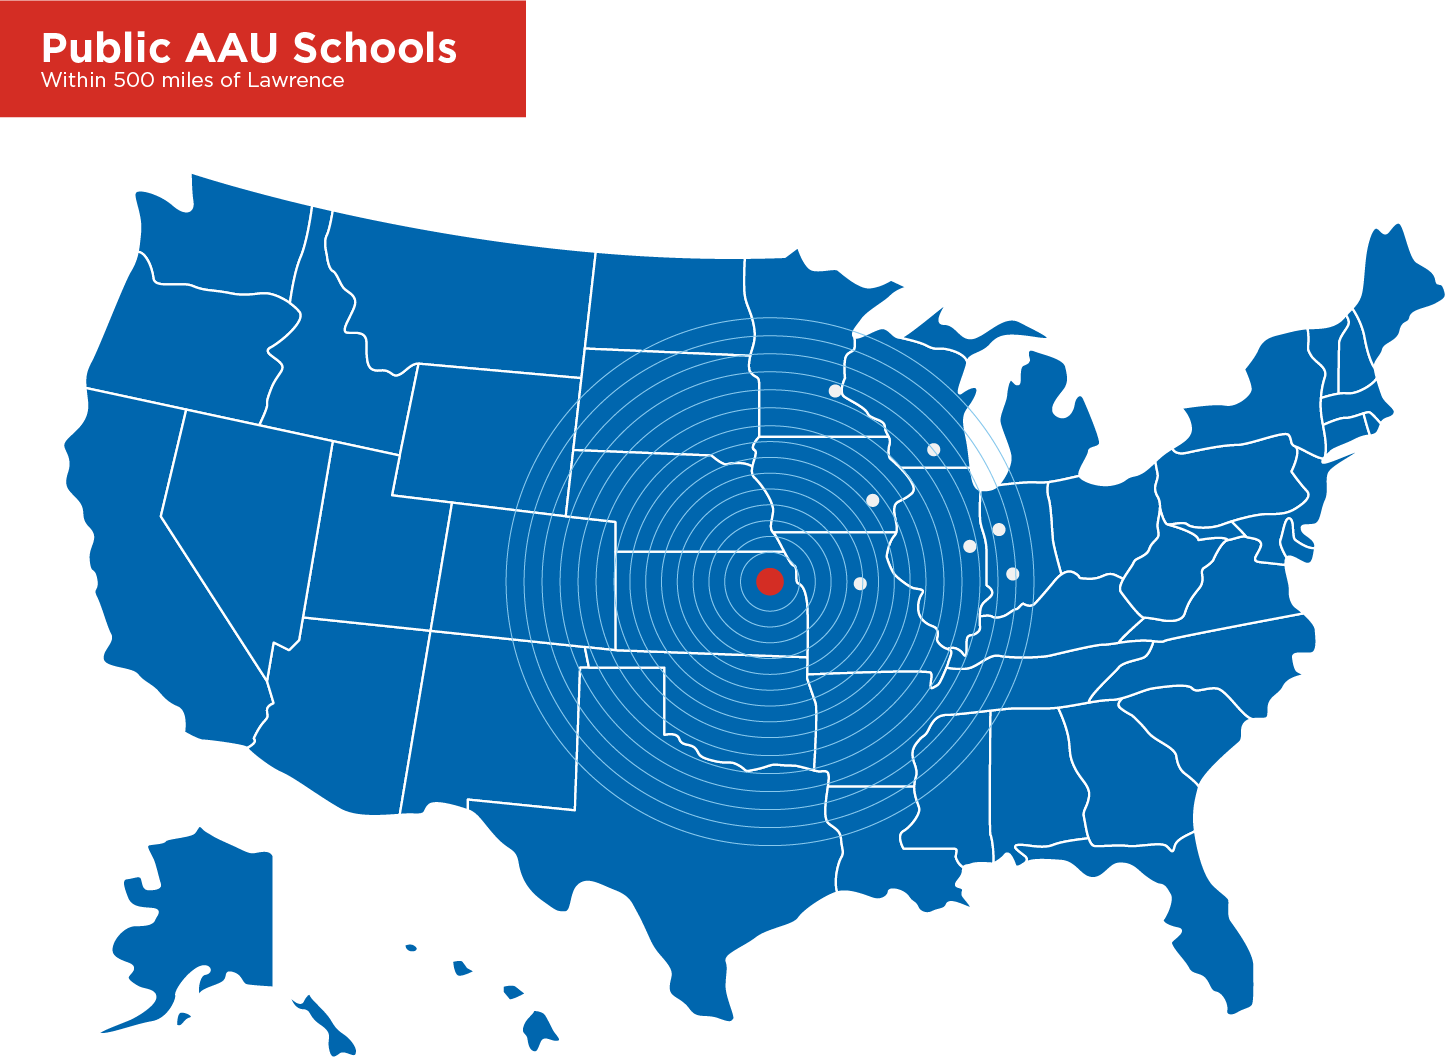 AAU Schools within 500 miles of Lawrence